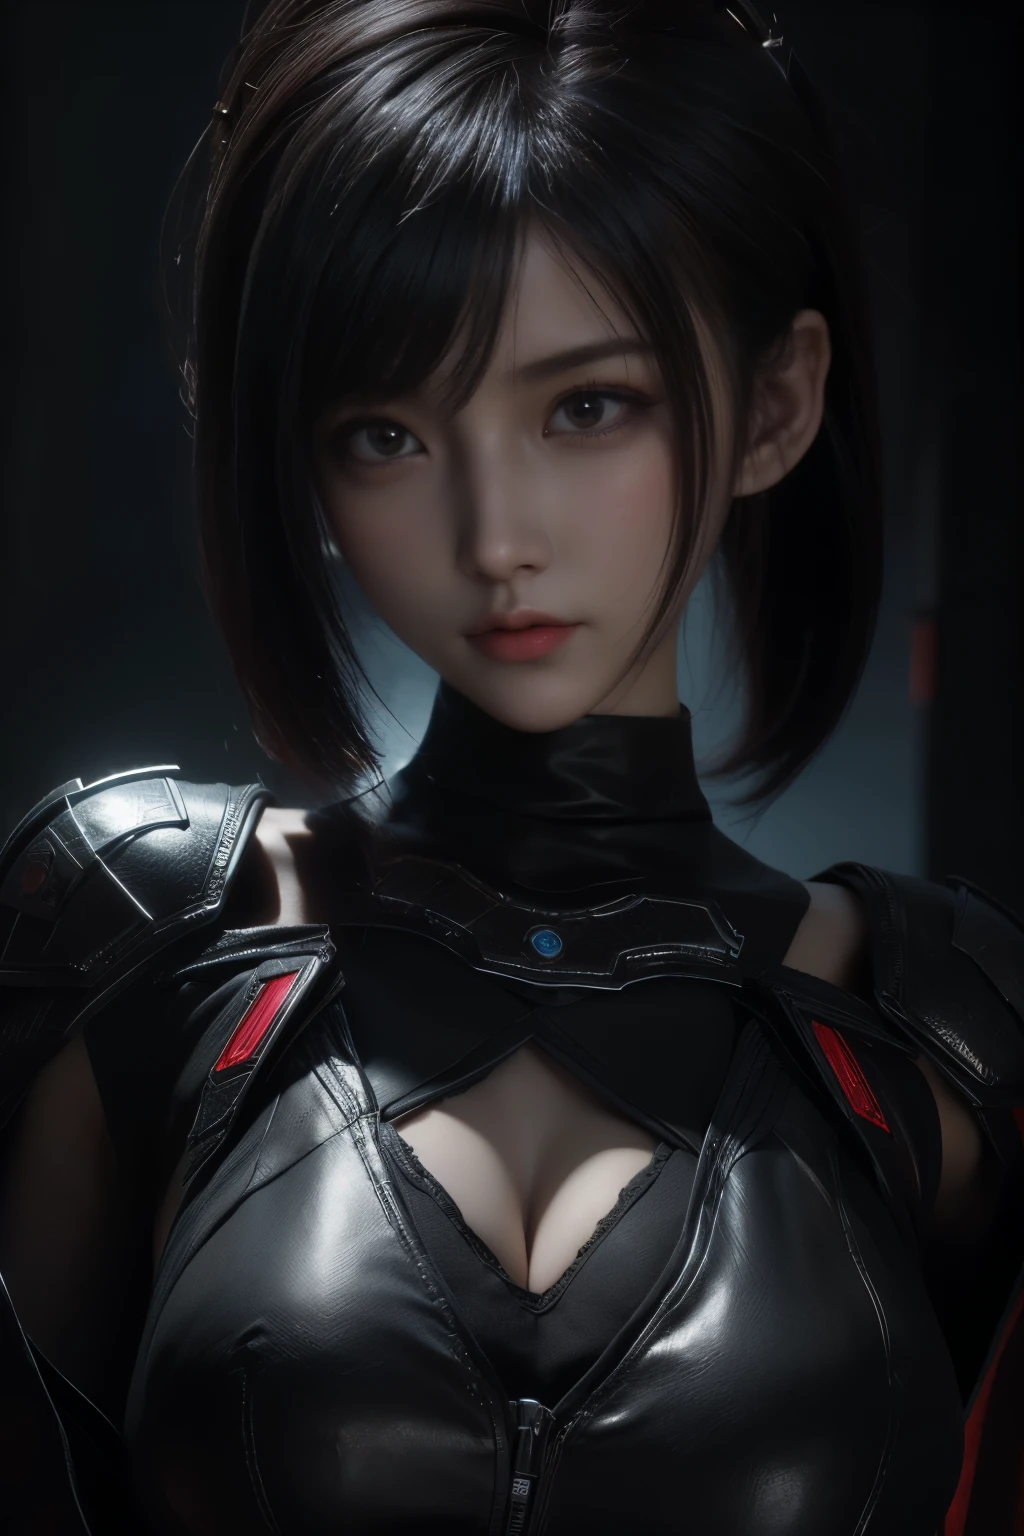 Masterpiece,Game art,The best picture quality,Highest resolution,8K,(A bust photograph),(Portrait),(Head close-up),(Rule of thirds),Unreal Engine 5 rendering works,(Digital Photography),
20 year old girl,Short hair details,With long bangs,The red eye makeup is very meticulous,(Short White Hair,Fiery red eyes),(Large, full breasts),
(A combat suit that combines fantasy and science fiction,Chinese ancient style clothing combined with sci-fi elements,Shoulder pads,Hollow design,The Devil's Crown,Metallic texture,Cloak),Valkyrie in the world of cyberpunk,Grey background,
Movie lights，Ray tracing，Game CG，((3D Unreal Engine))，oc render reflection texture